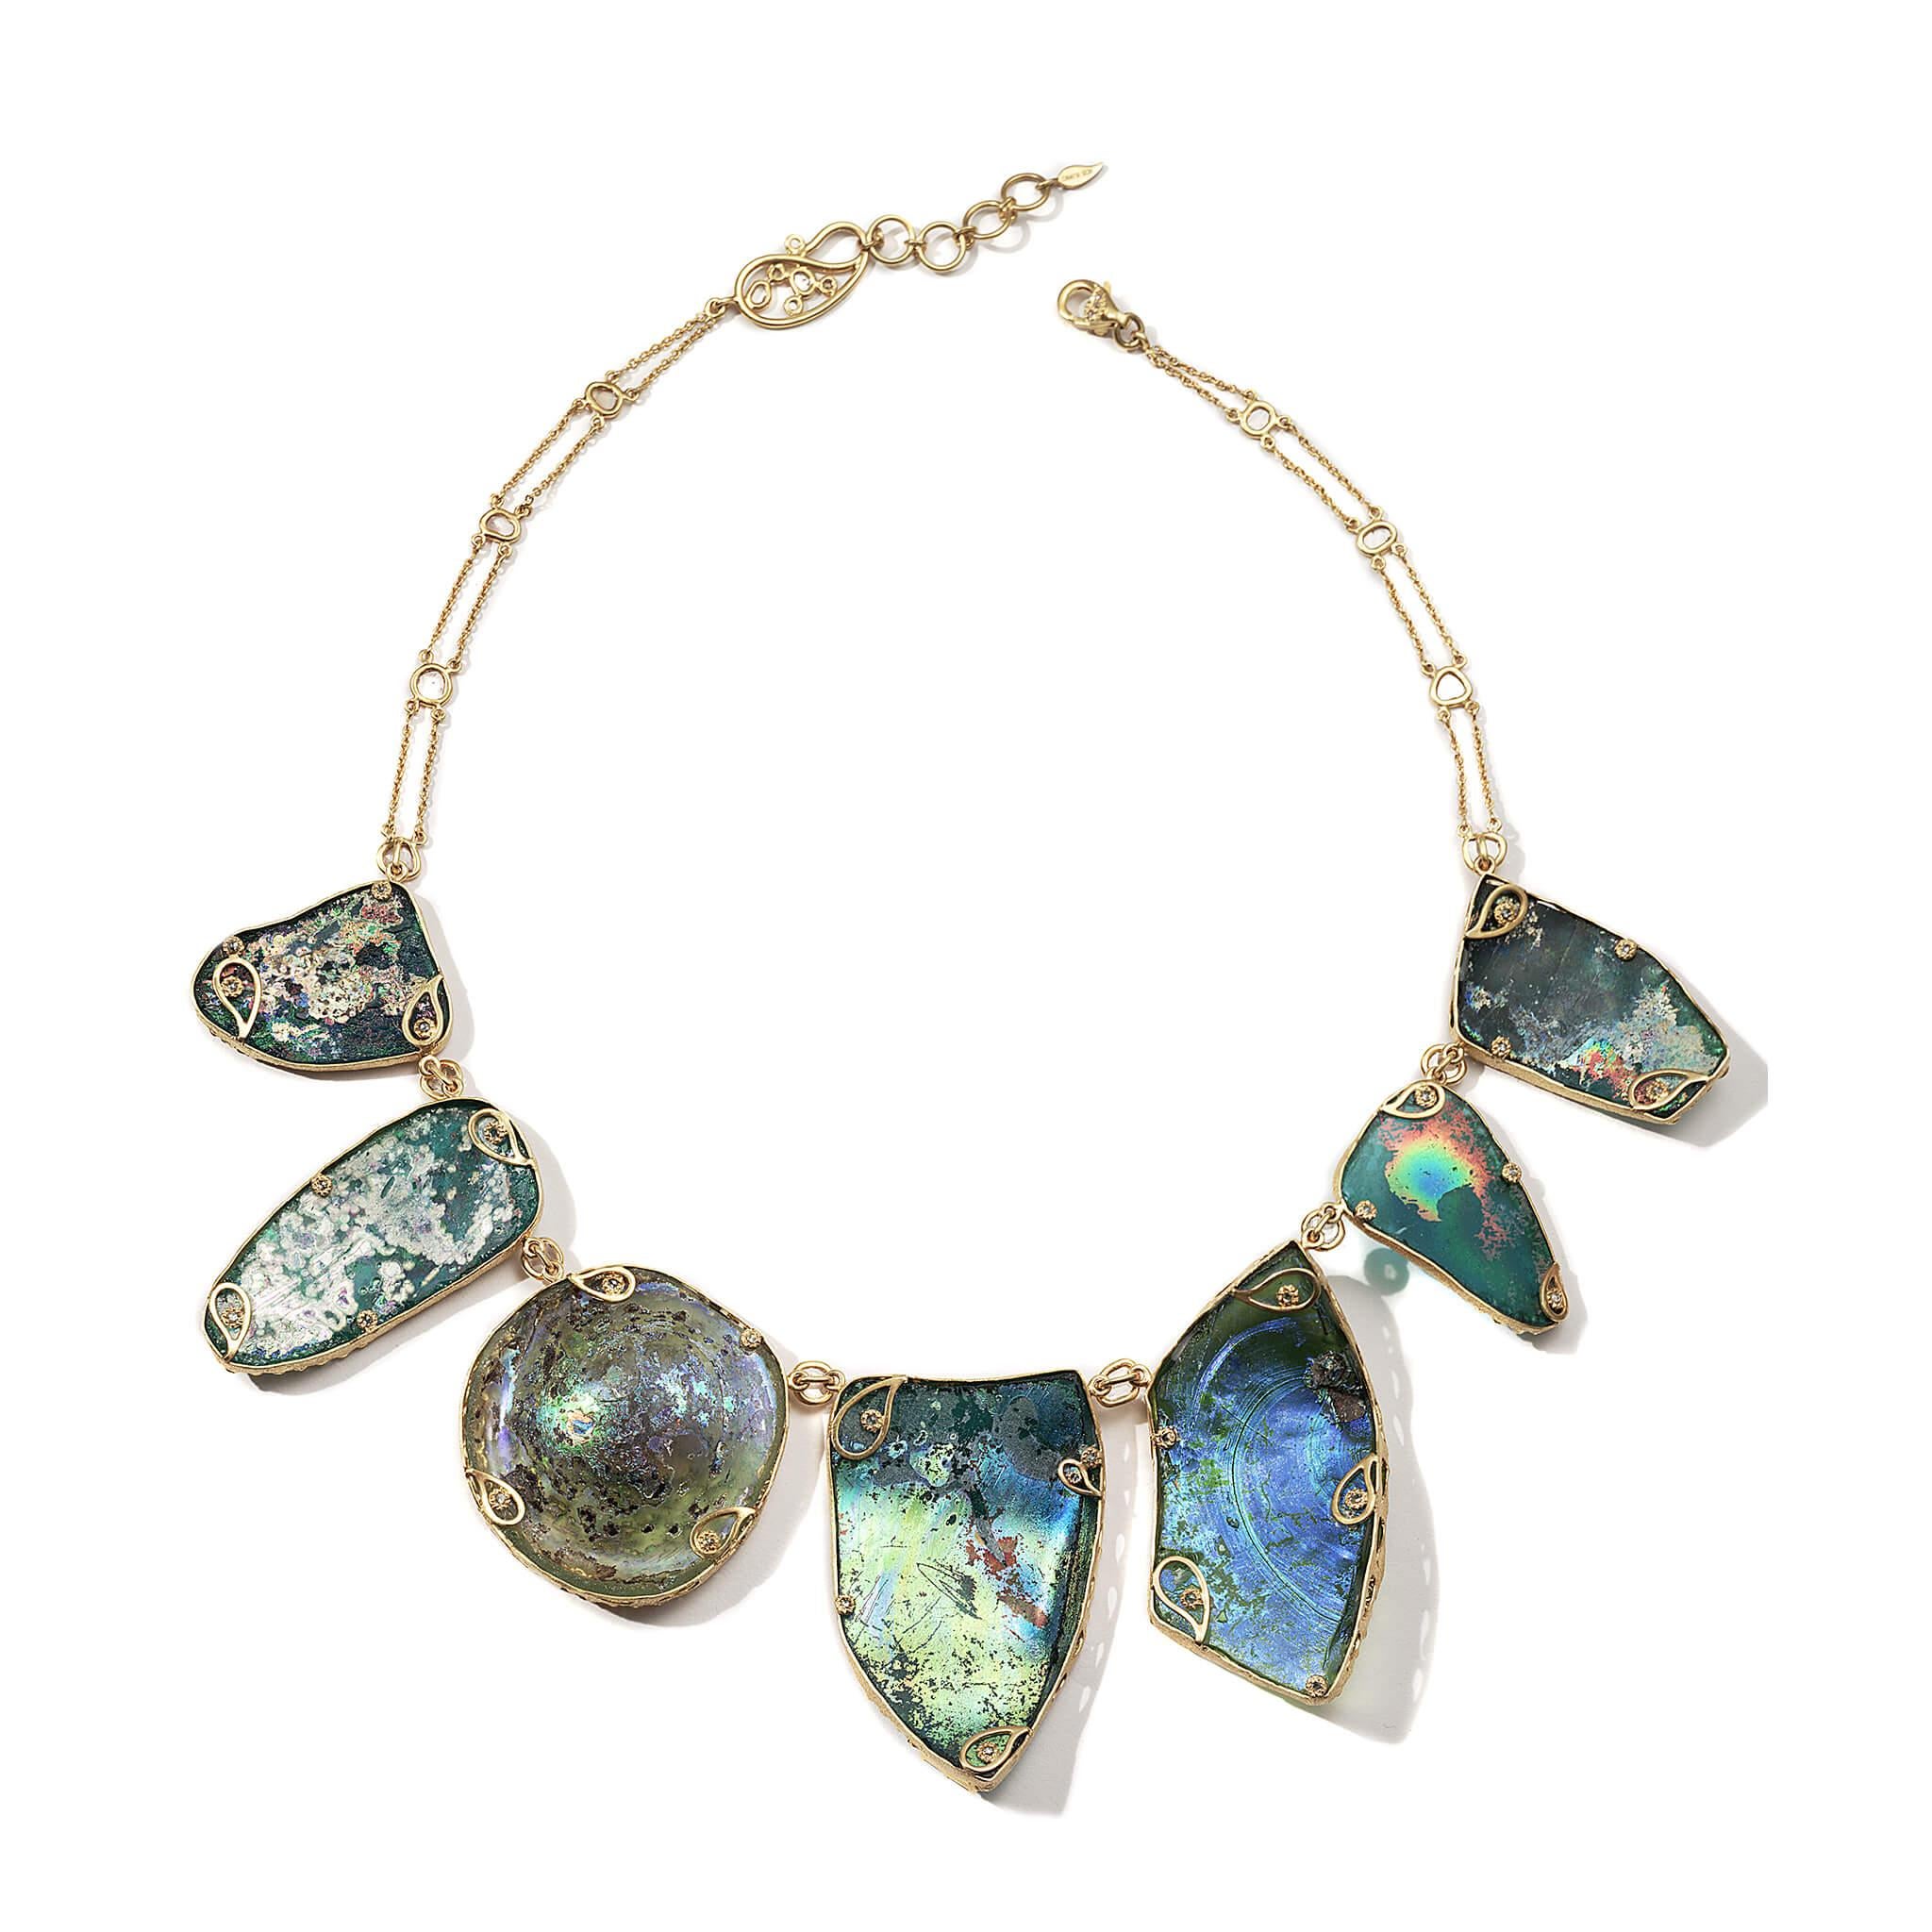 Coomi ancient Roman glass necklace set in 20K yellow gold with 3.25cts diamonds.

Coomi presents her latest addition to the Antiquity collection, Ancient Roman Glass. Each slice of the world’s first handblown glass, dating back to the 1st century